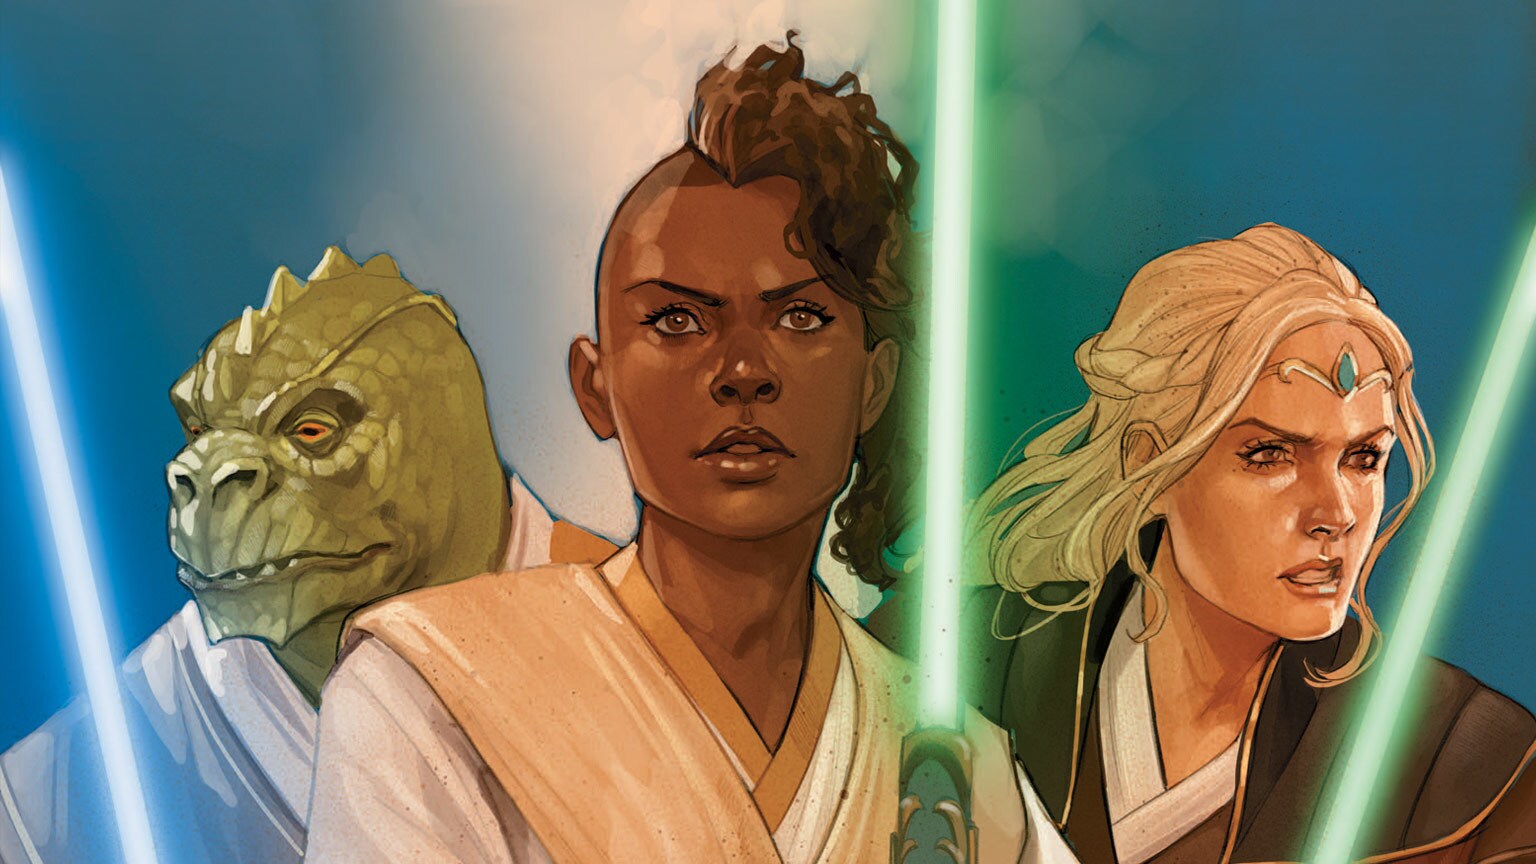 A Padawan Faces the Jedi Trials in Marvel’s Star Wars: The High Republic #1 – Exclusive Preview